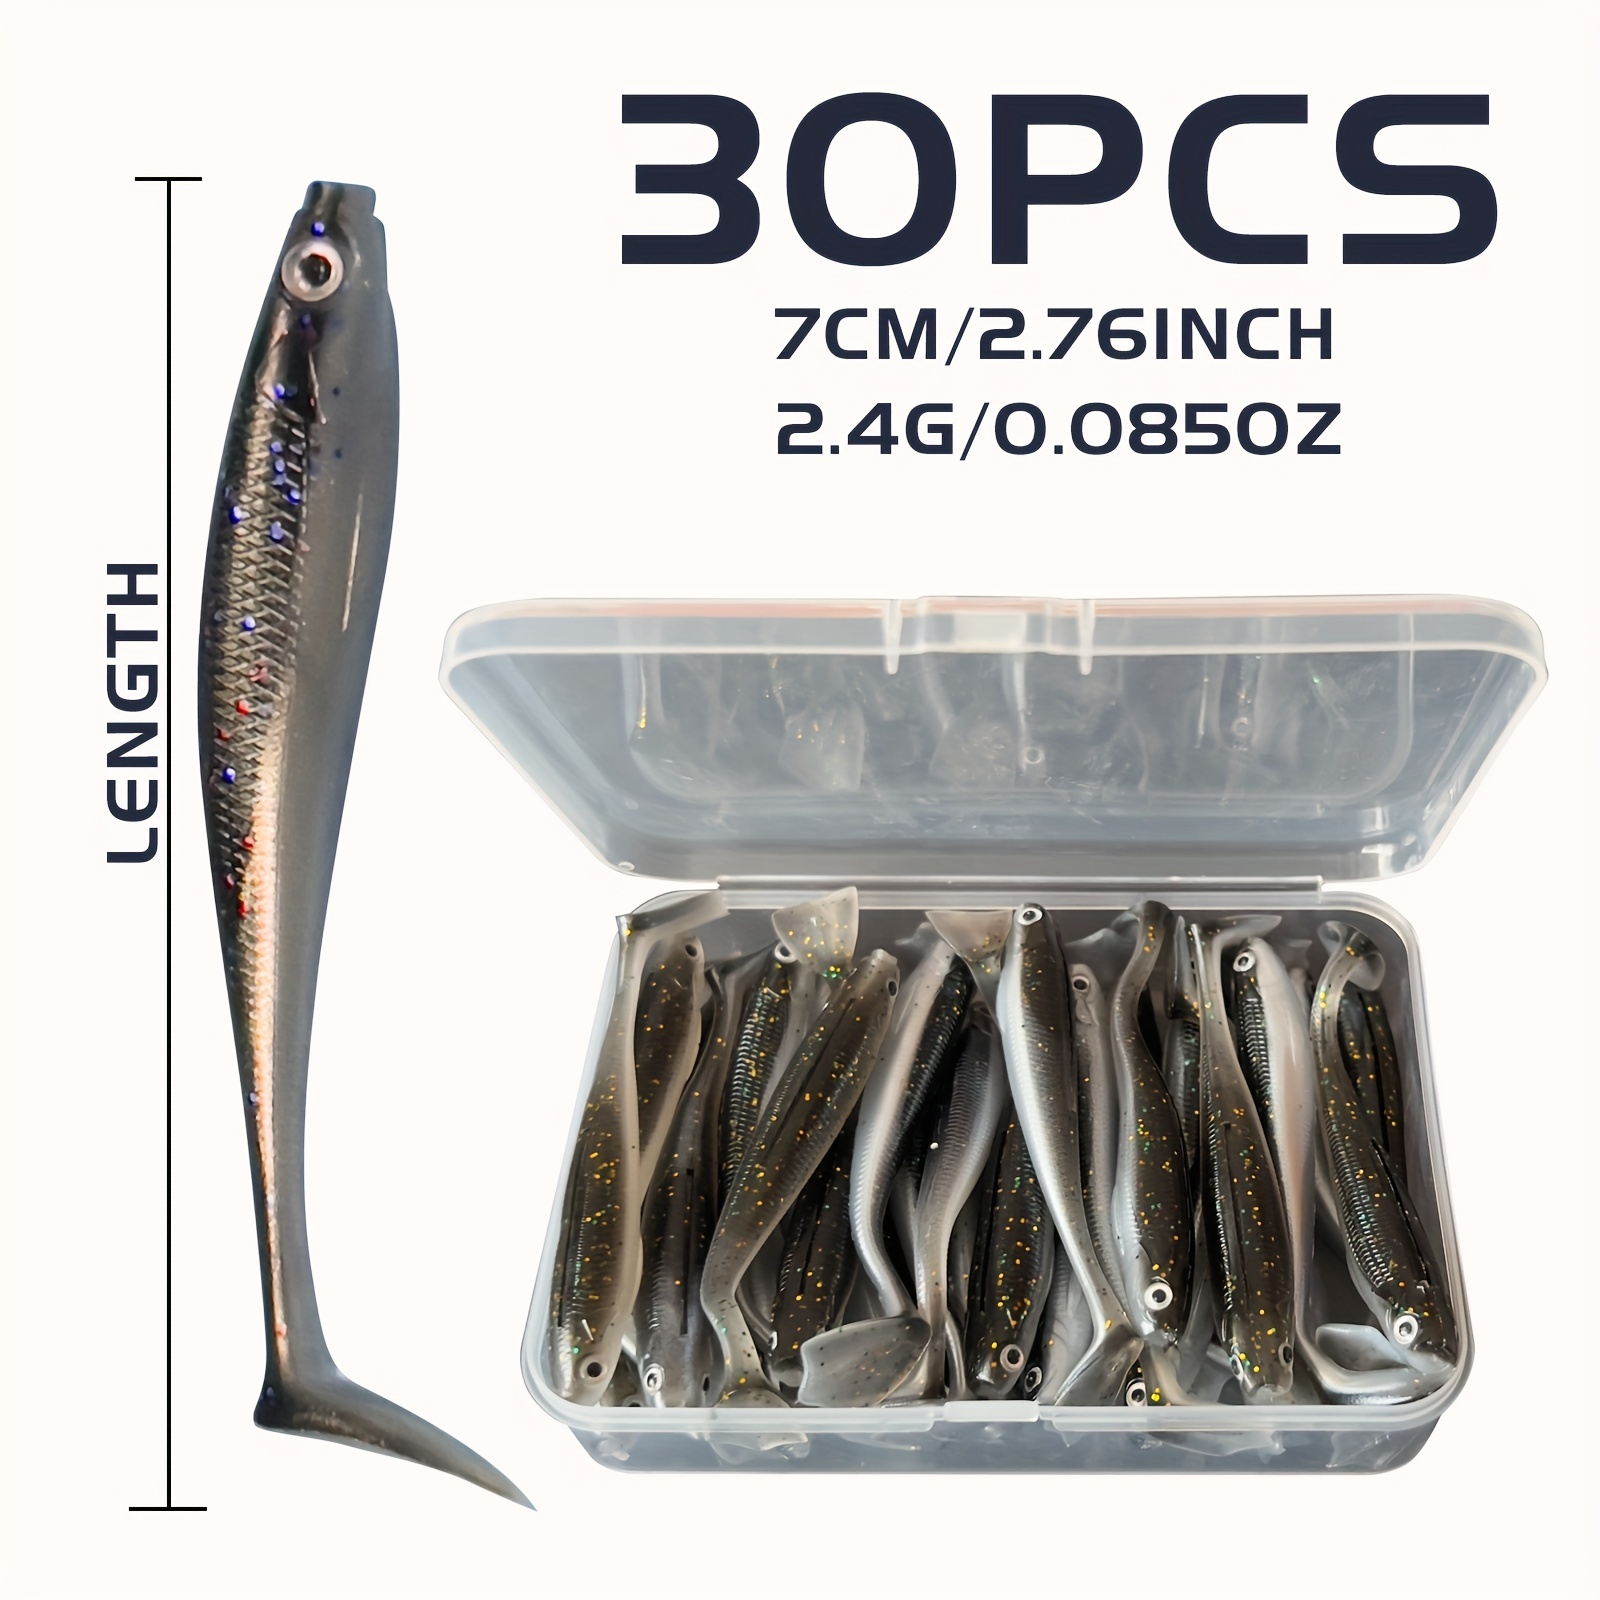 

30pcs Paddle Tail Soft Fishing Lures - Bionic Swimbait For Perch, Catfish, And Rockfish - Artificial Bait With Lifelike Action